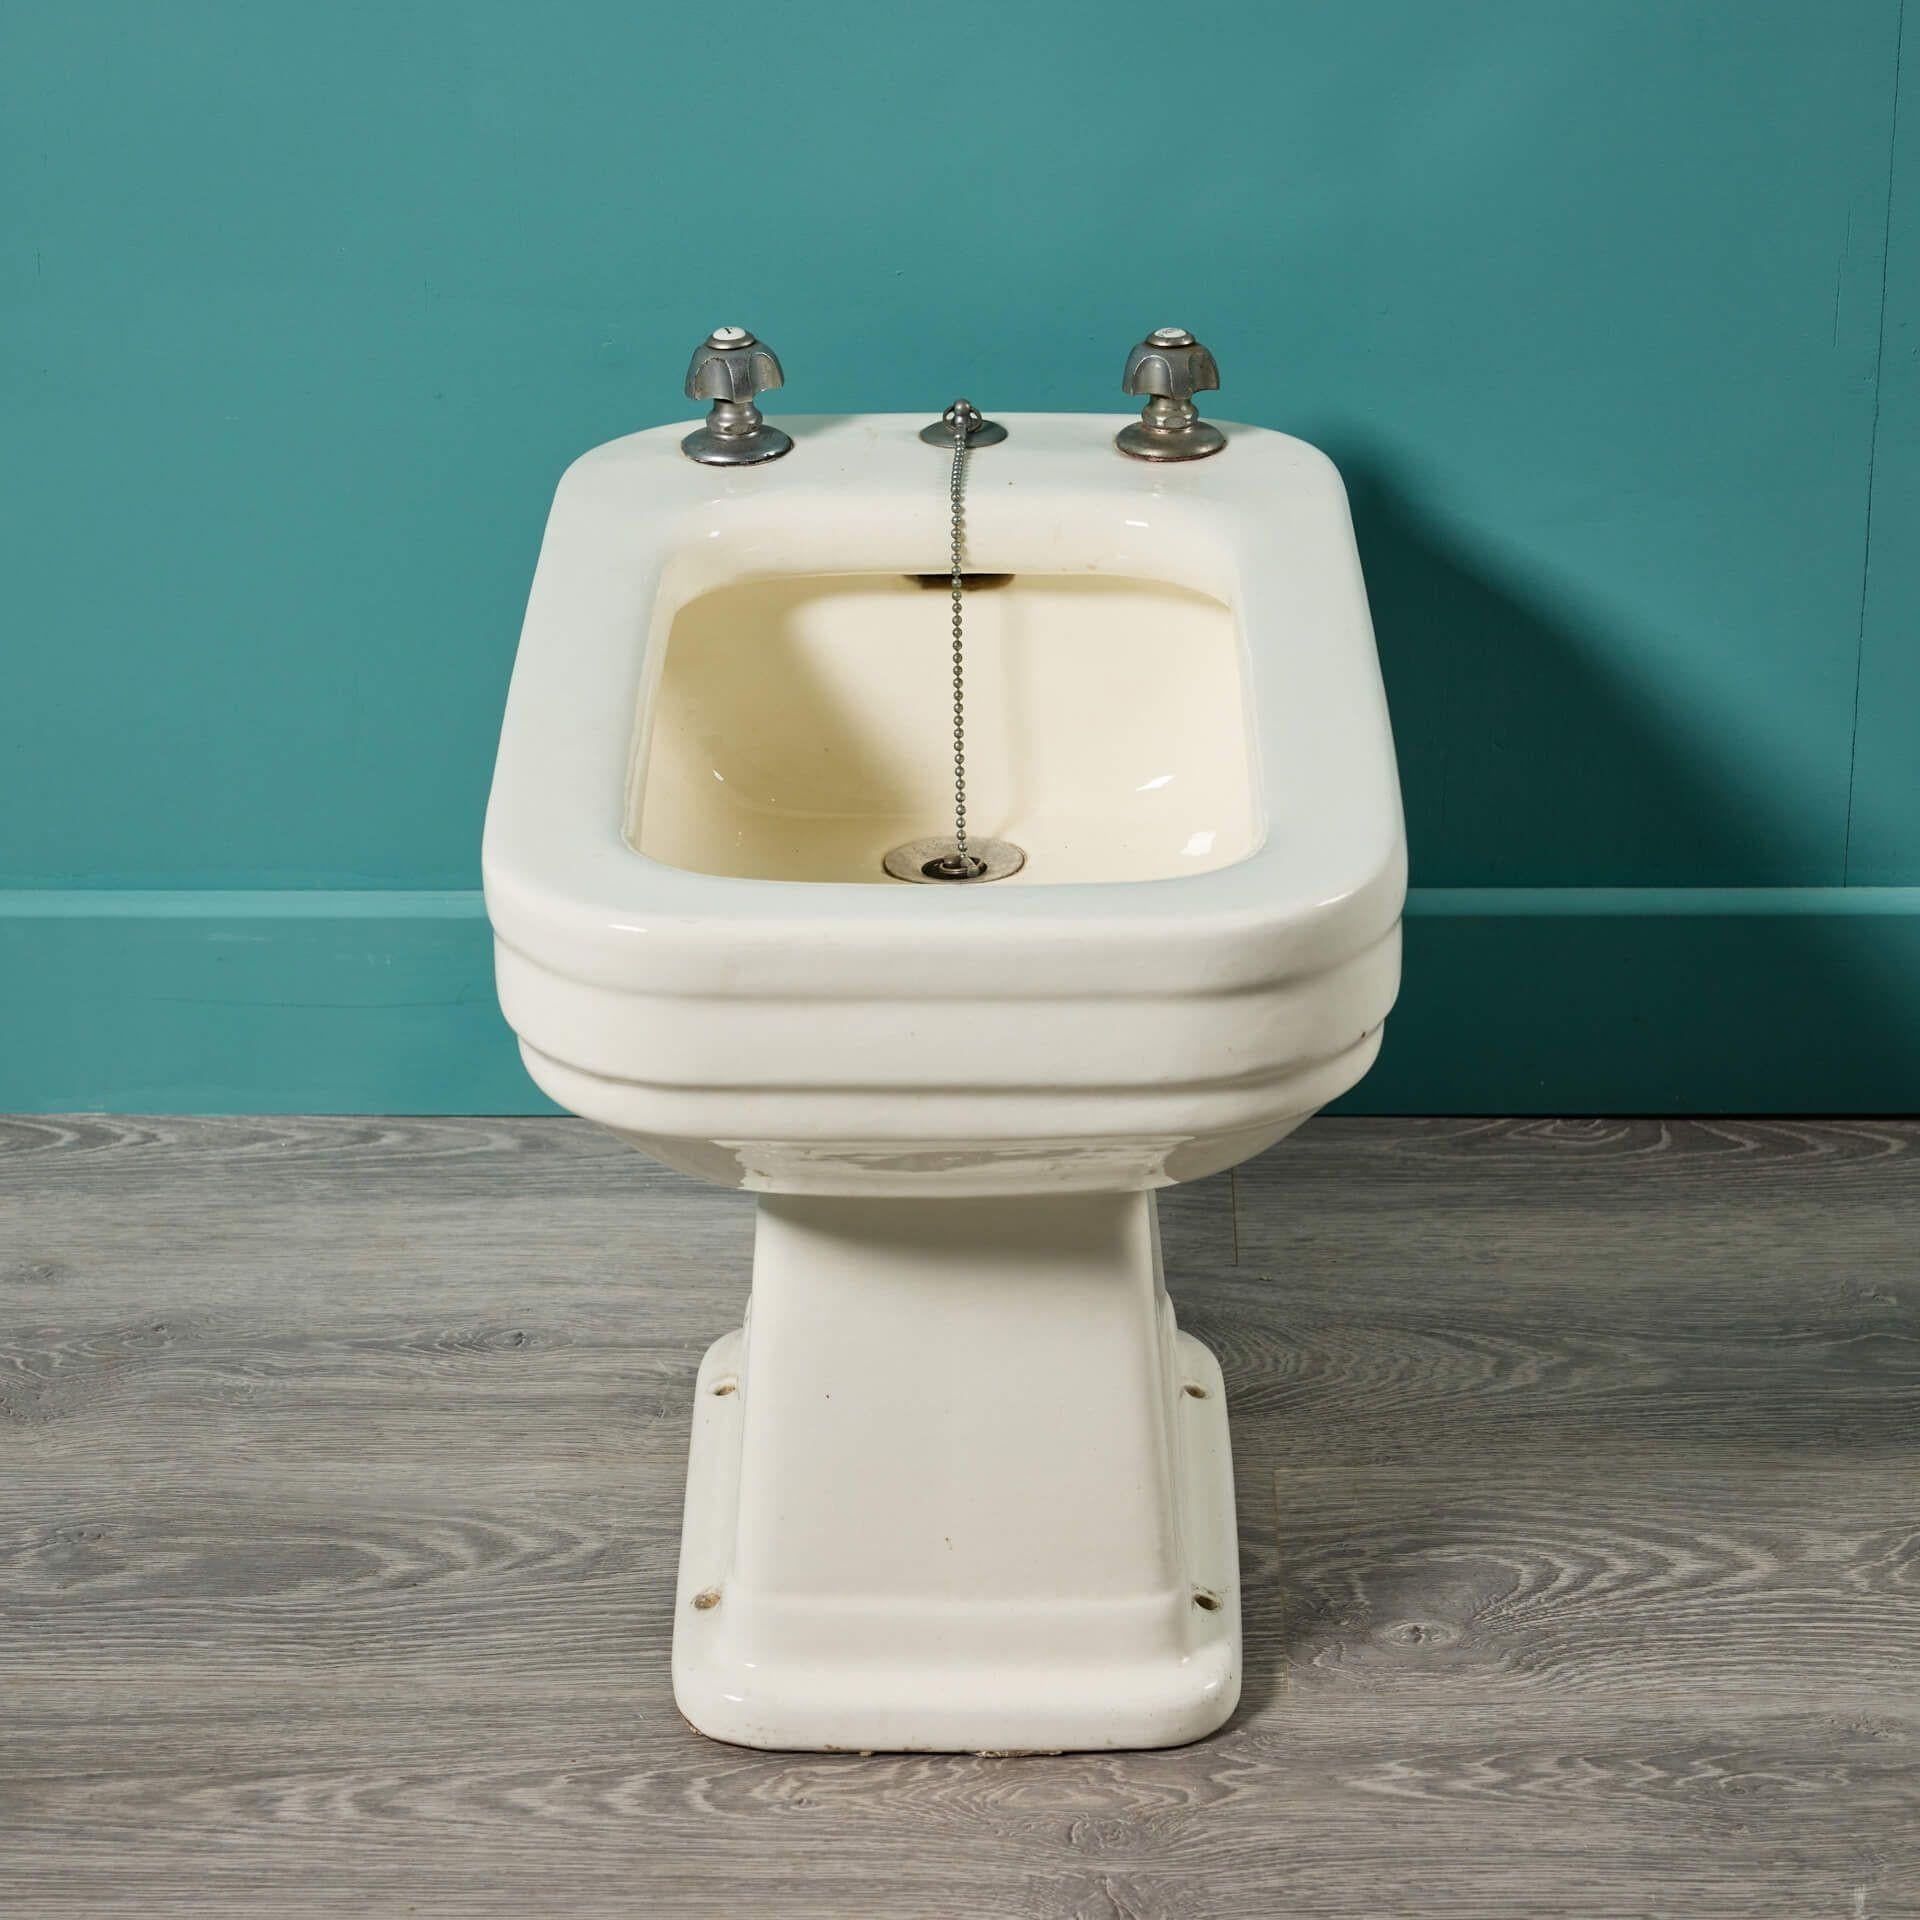 A reclaimed art deco French stoneware bidet. This early 20th century stylish bidet has a smooth square shape and light even craze, a lovely new addition for a bathroom in a contemporary or period property looking to incorporate Art Deco